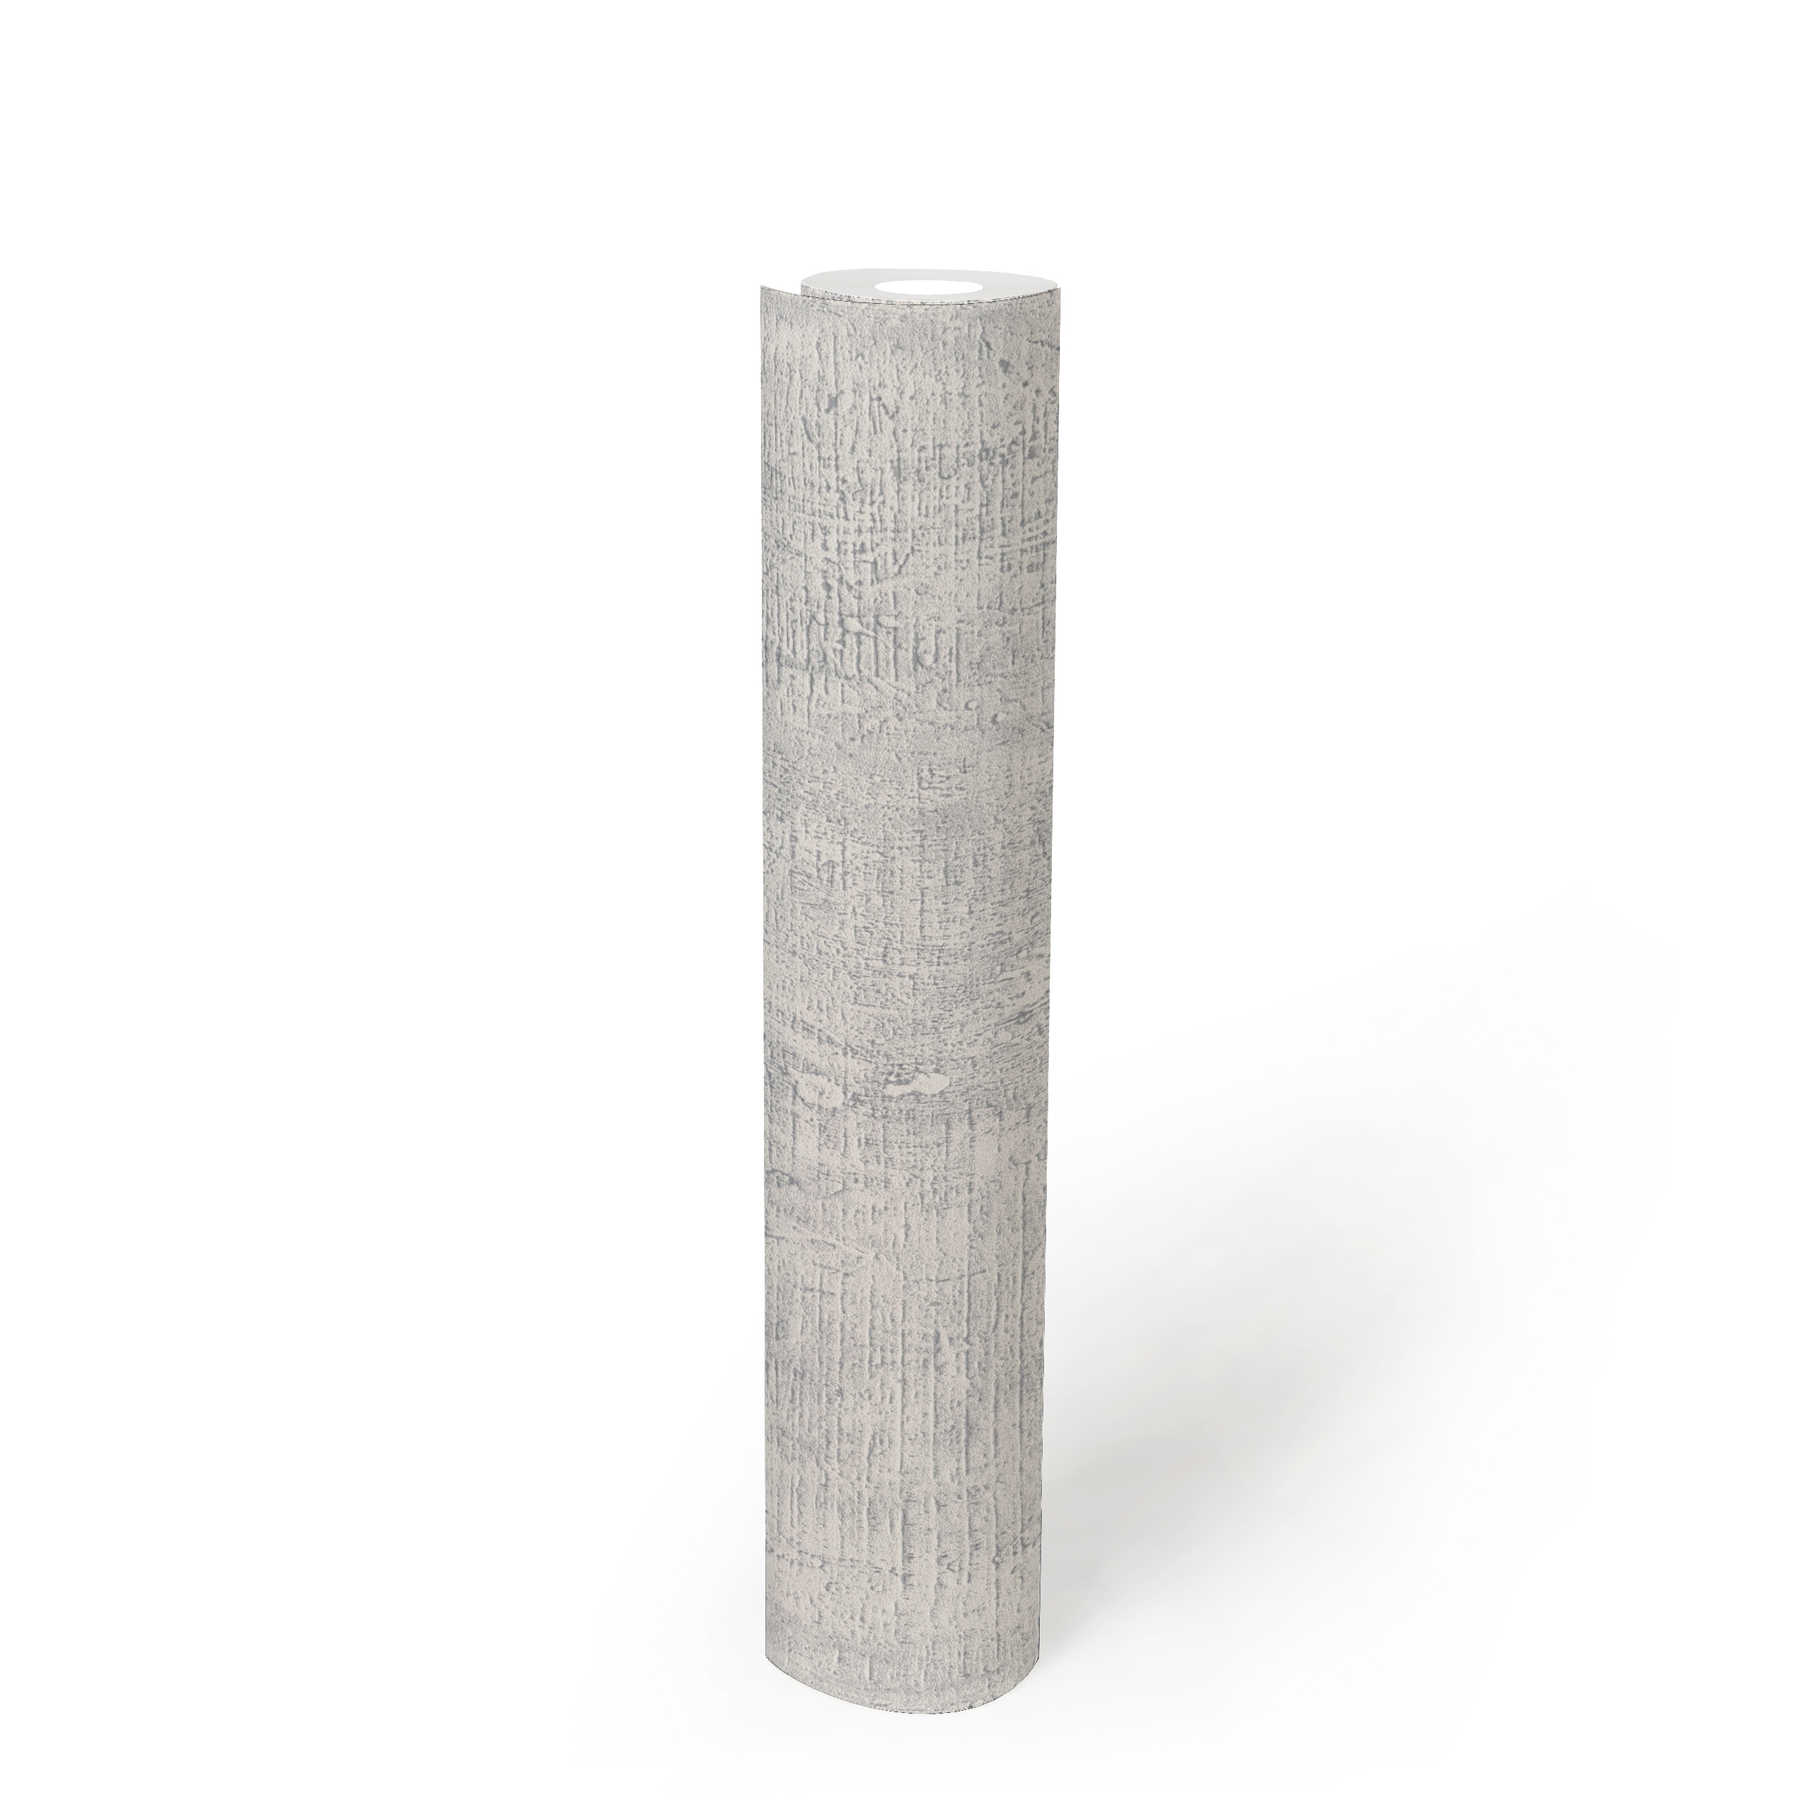             Non-woven wallpaper with rough structure & grooves pattern - white
        